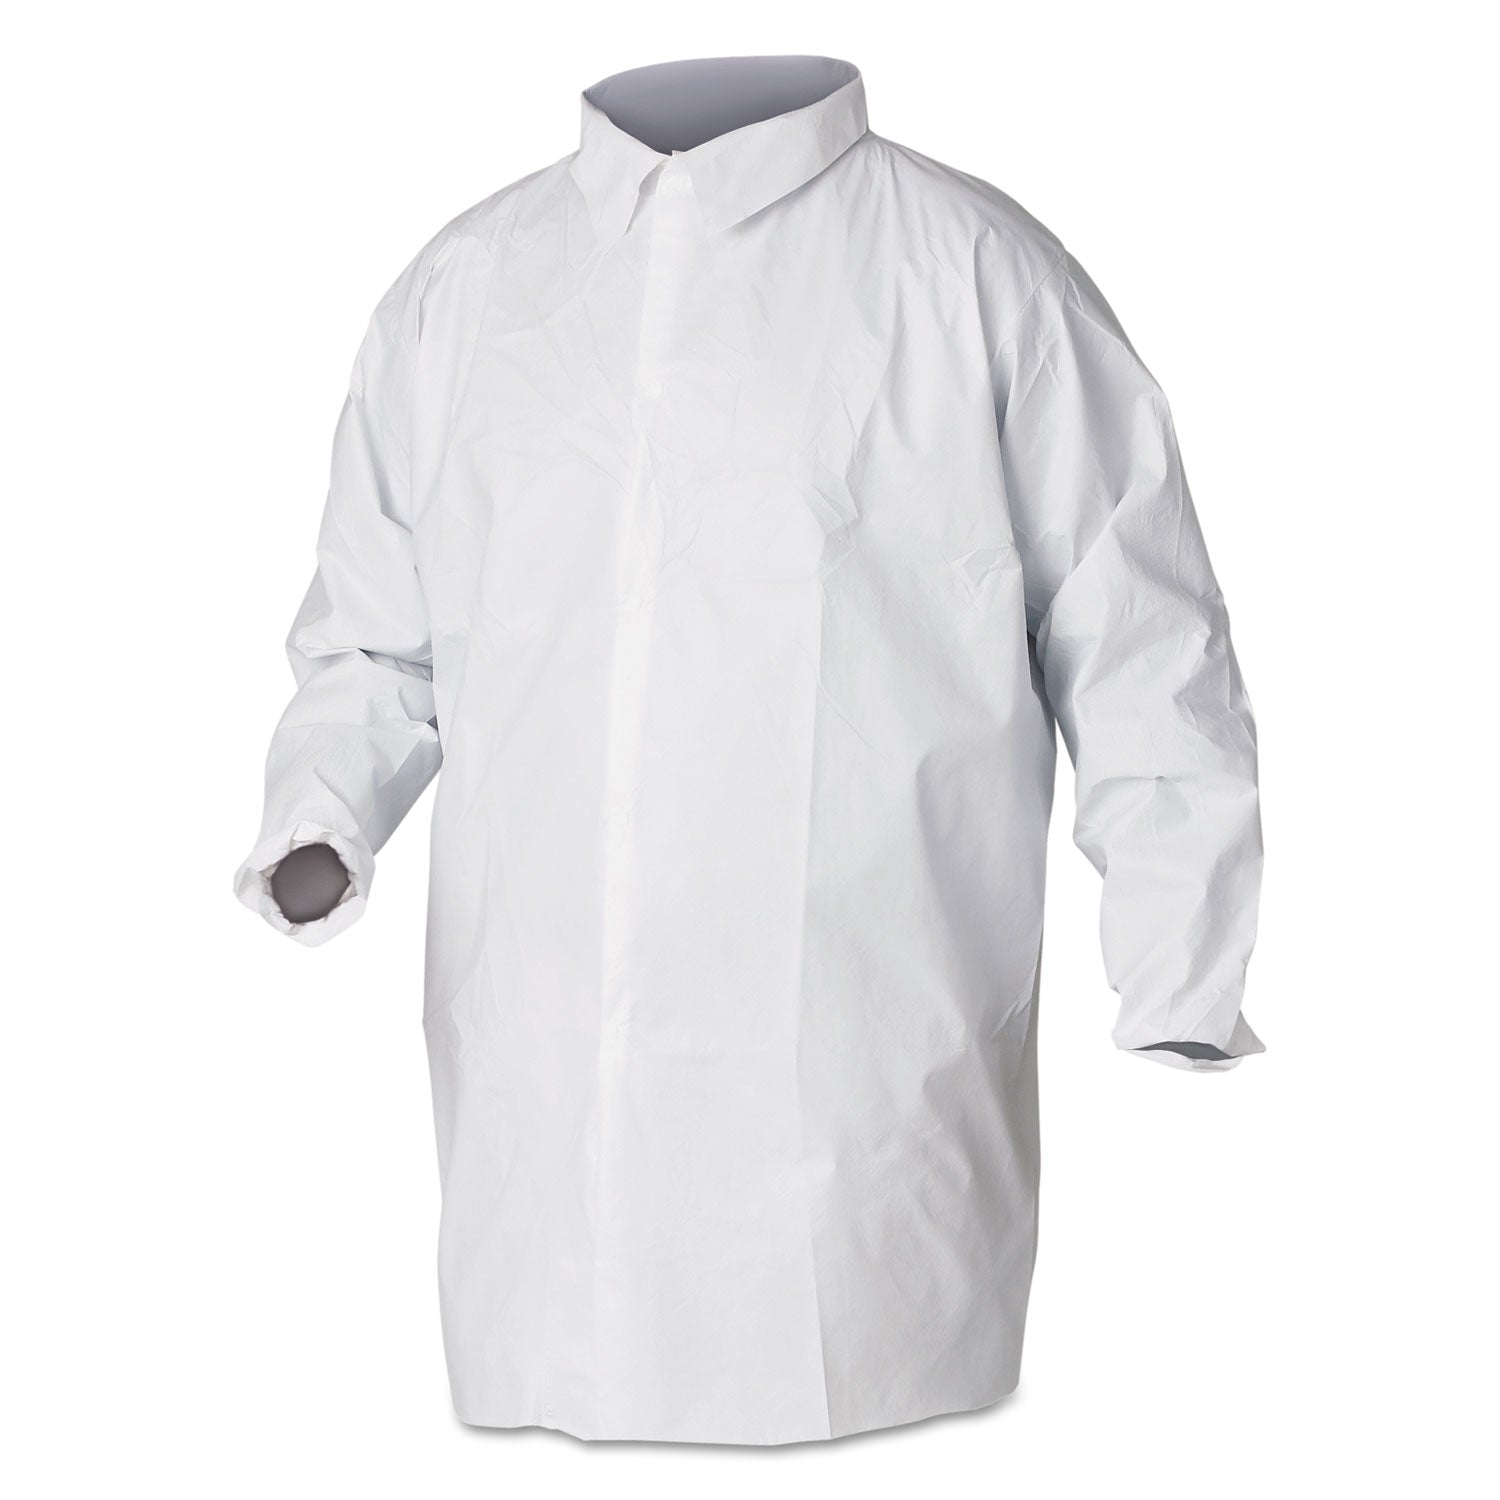 a40-liquid-and-particle-protection-lab-coats-x-large-white-30-carton_kcc44444 - 1